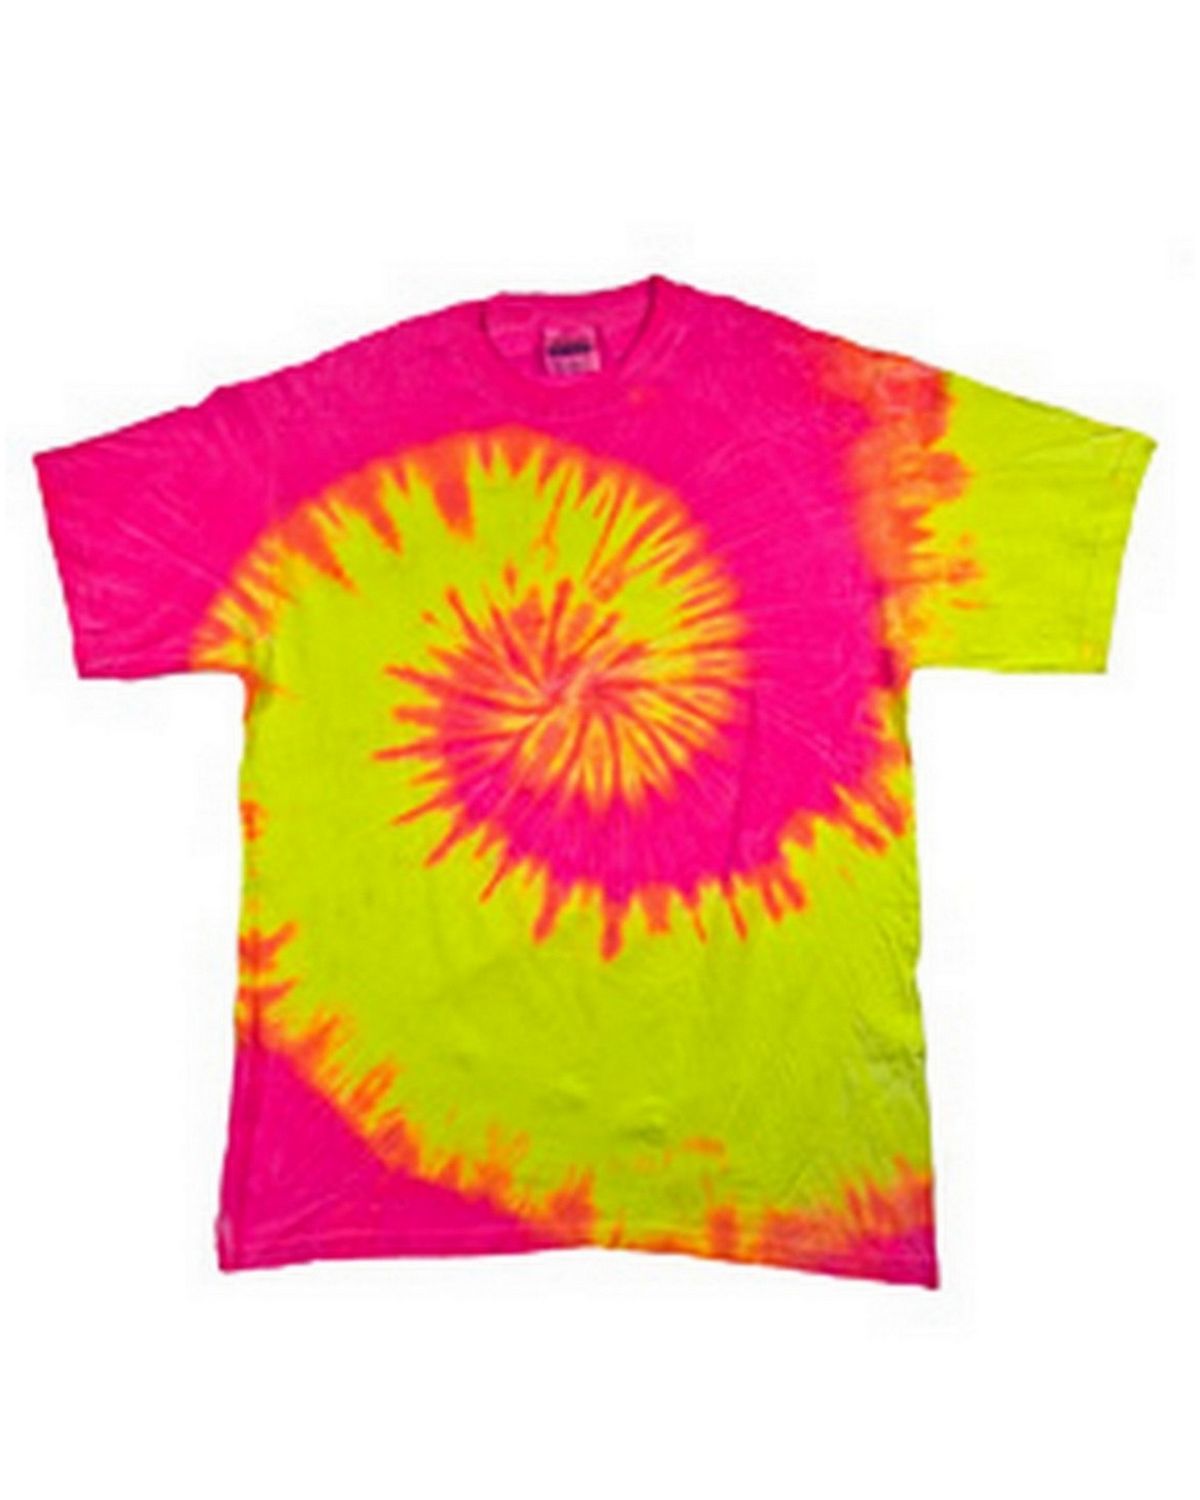 Tie-Dye CD100Y Youth 100% Cotton Tie-Dyed T-shirt